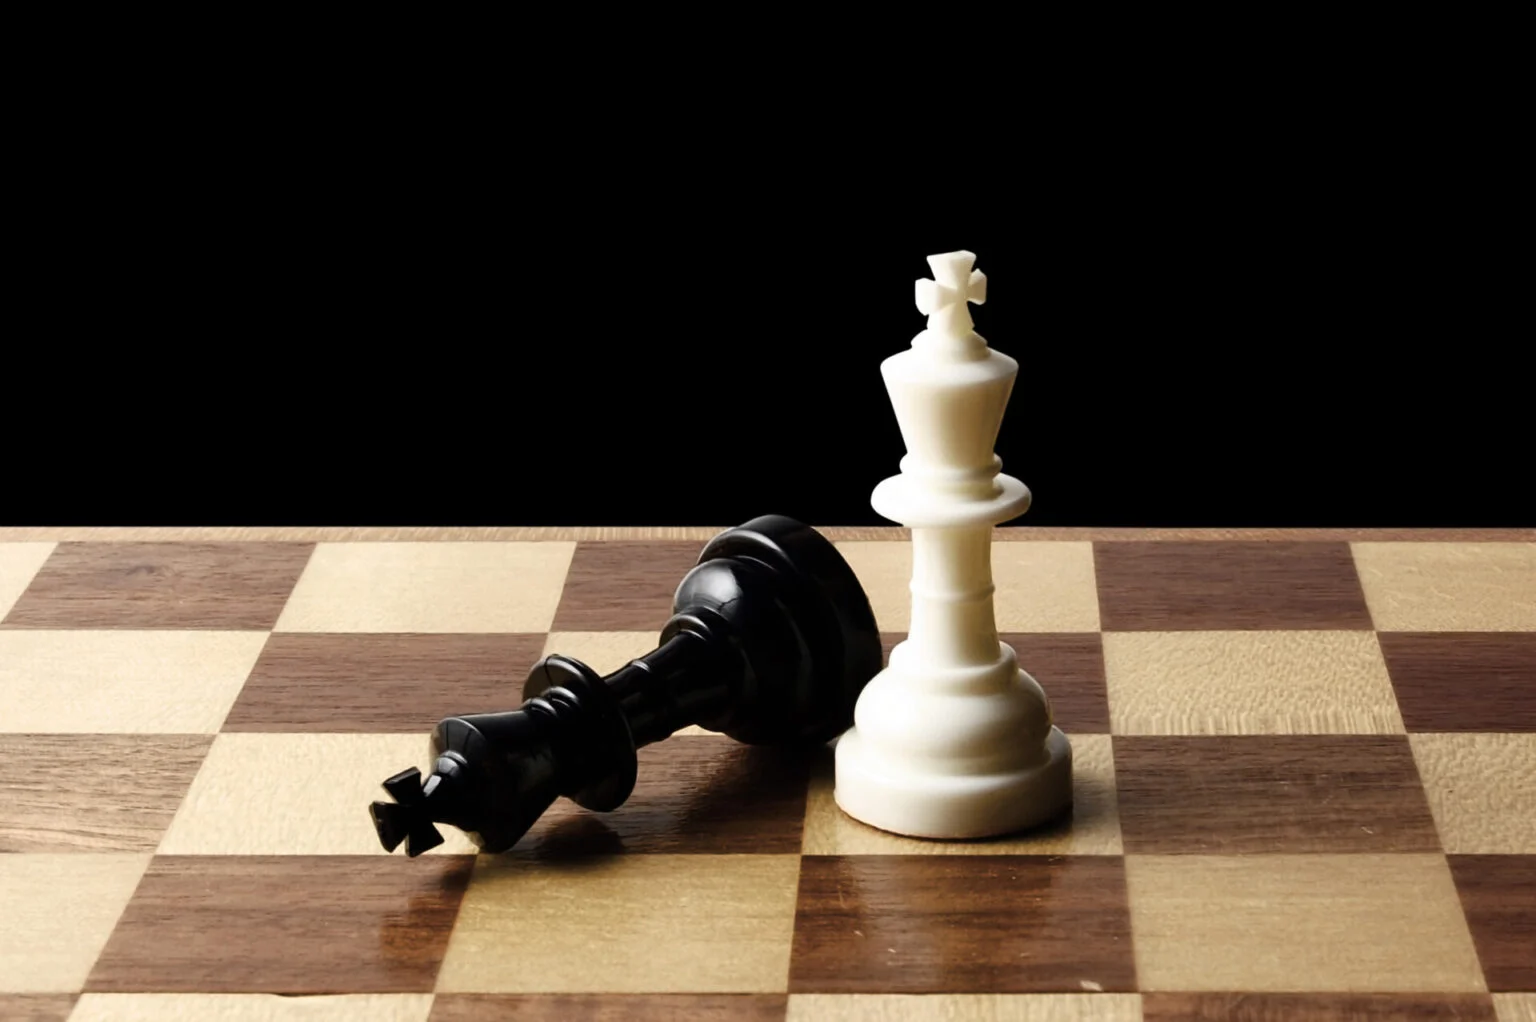 Teacher Background png download - 611*536 - Free Transparent Chess